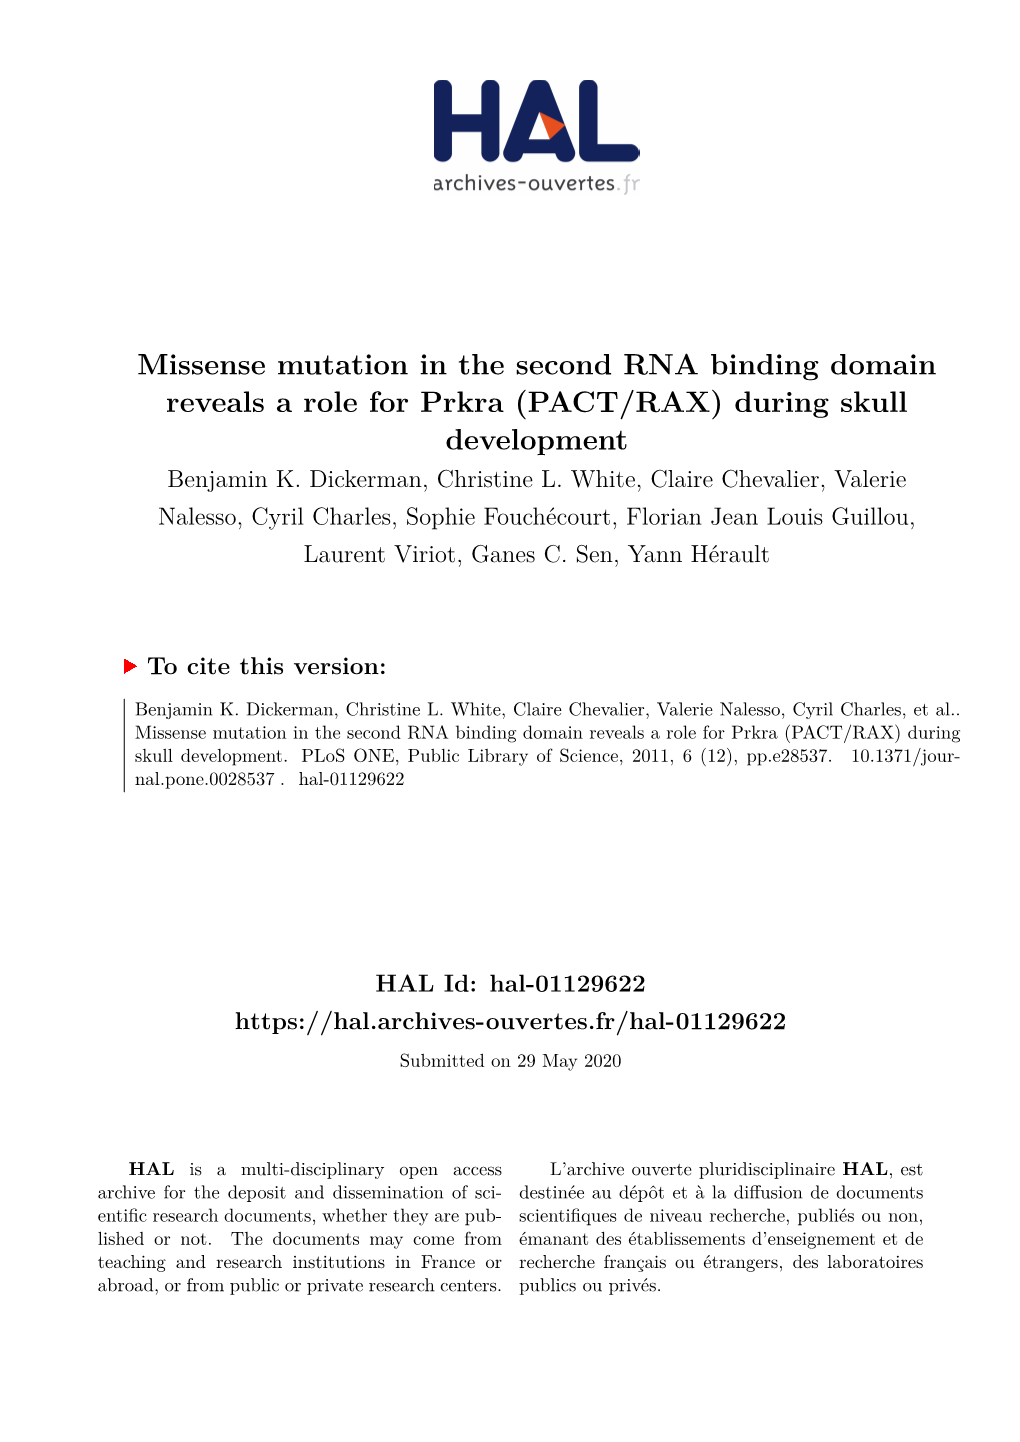 Missense Mutation in the Second RNA Binding Domain Reveals a Role for Prkra (PACT/RAX) During Skull Development Benjamin K